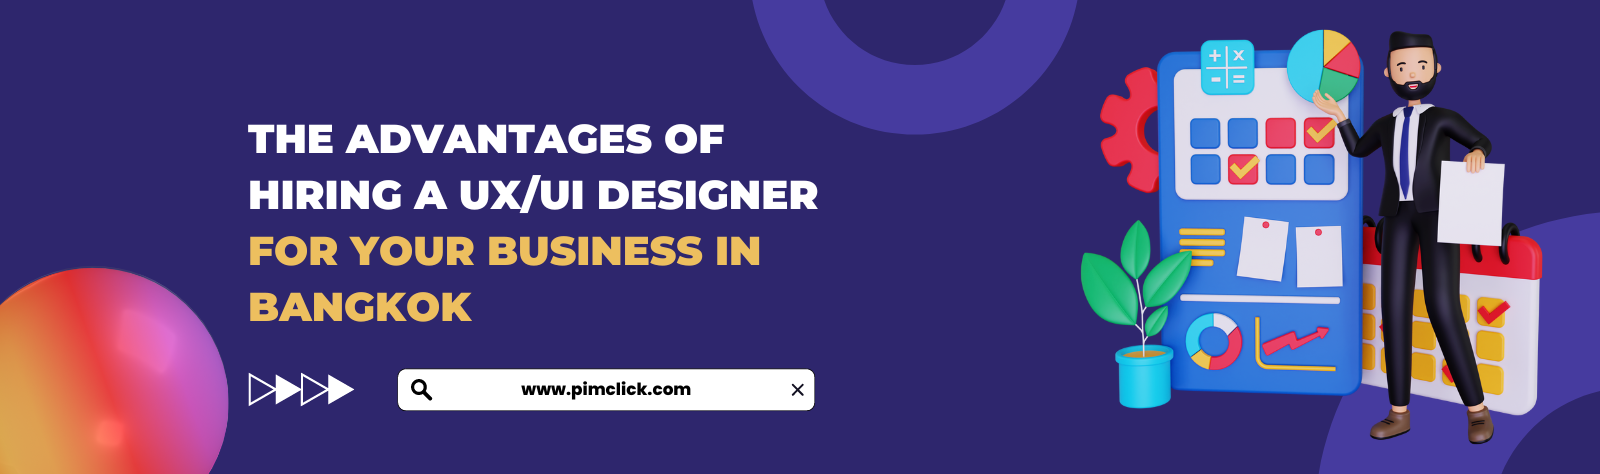 the-advantages-of-hiring-a-uxui-designer-for-your-business-in-bangkok